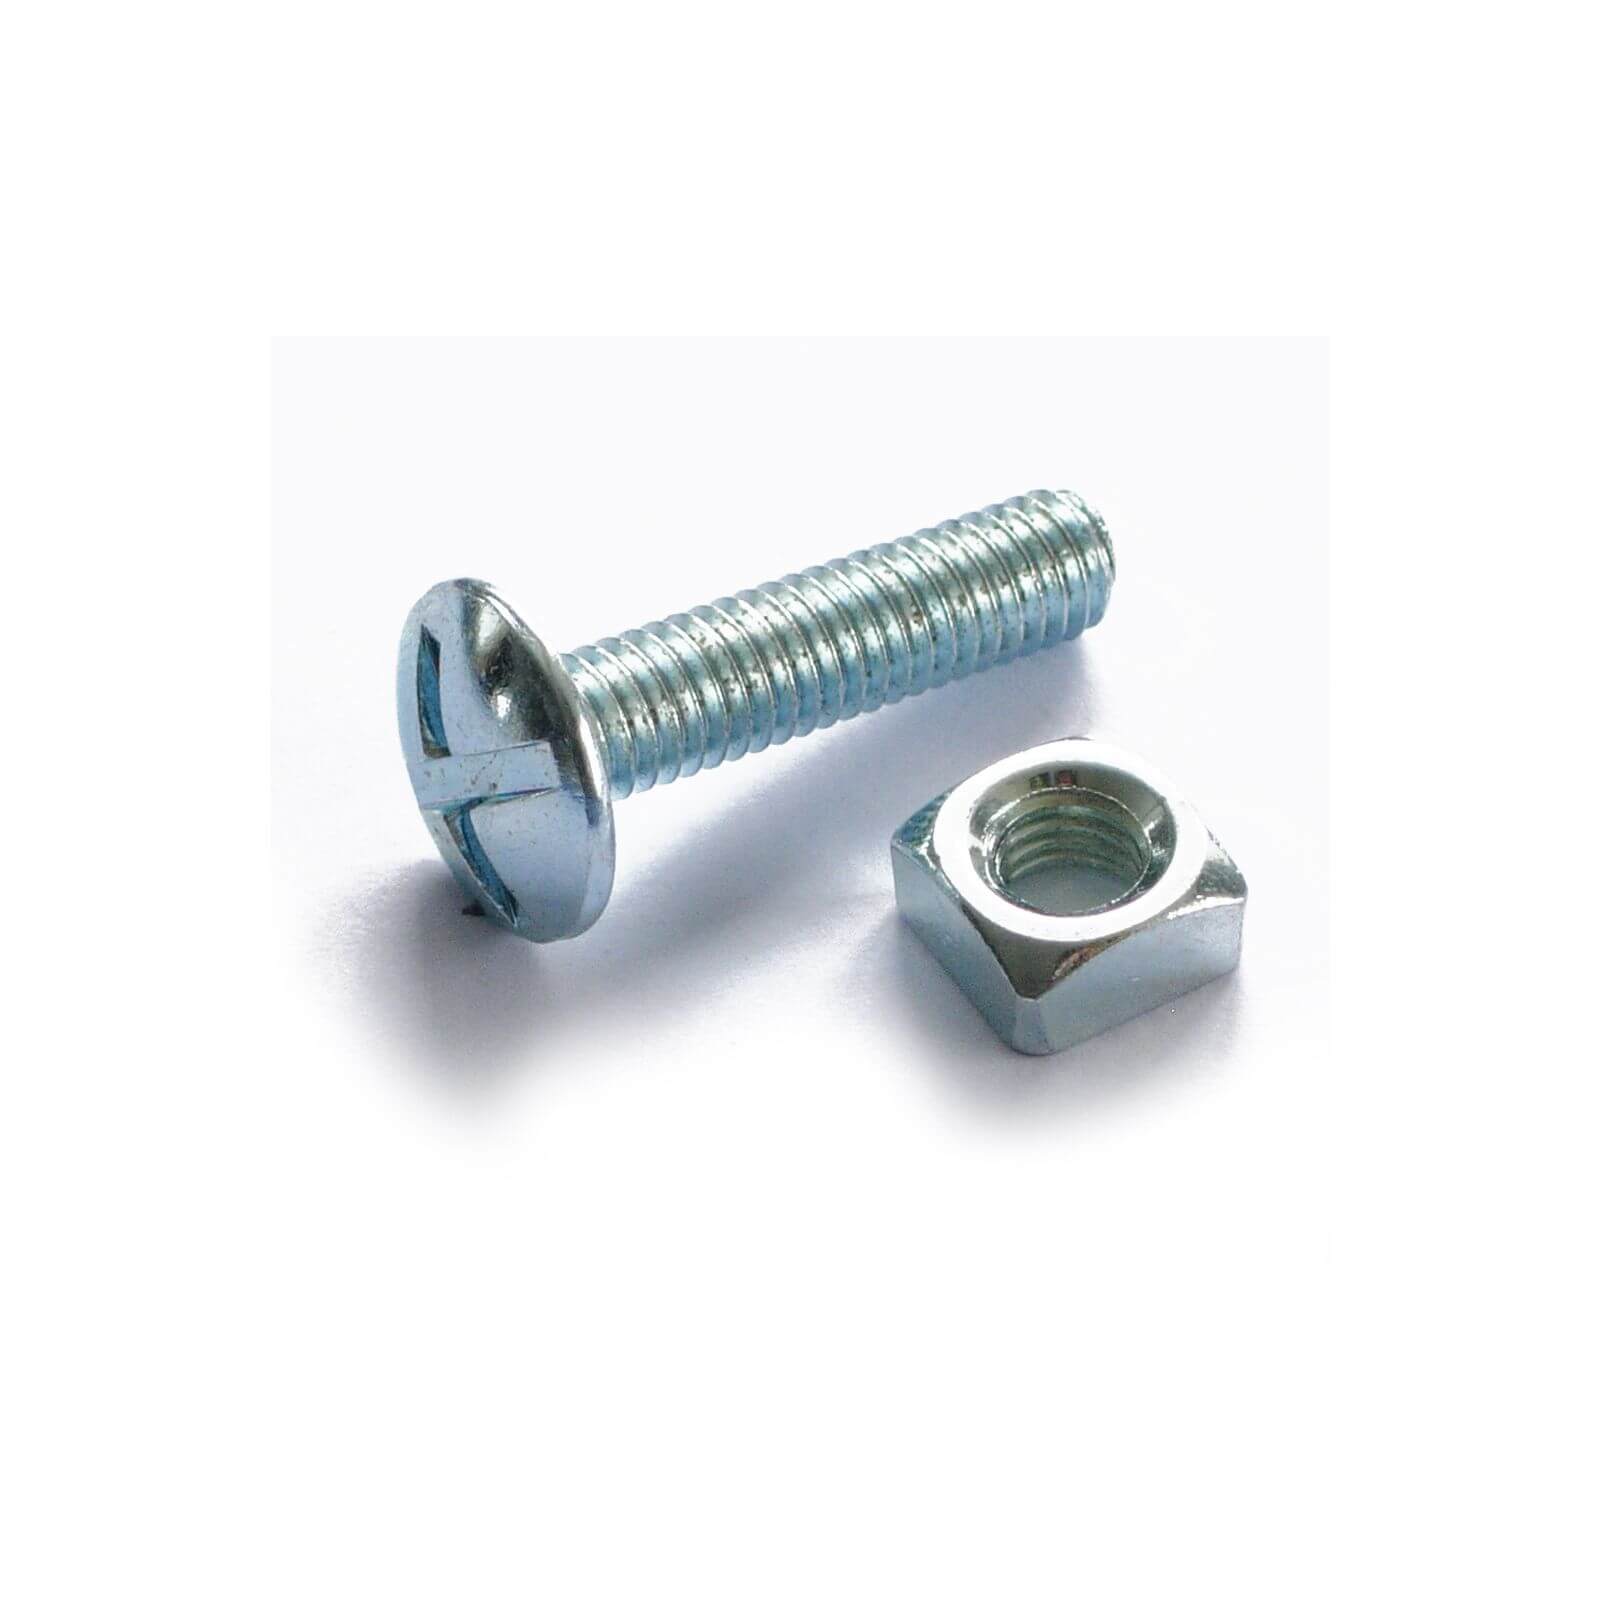 Roofing Bolt - Bright Zinc Plated - M6 25mm - 10 Pack